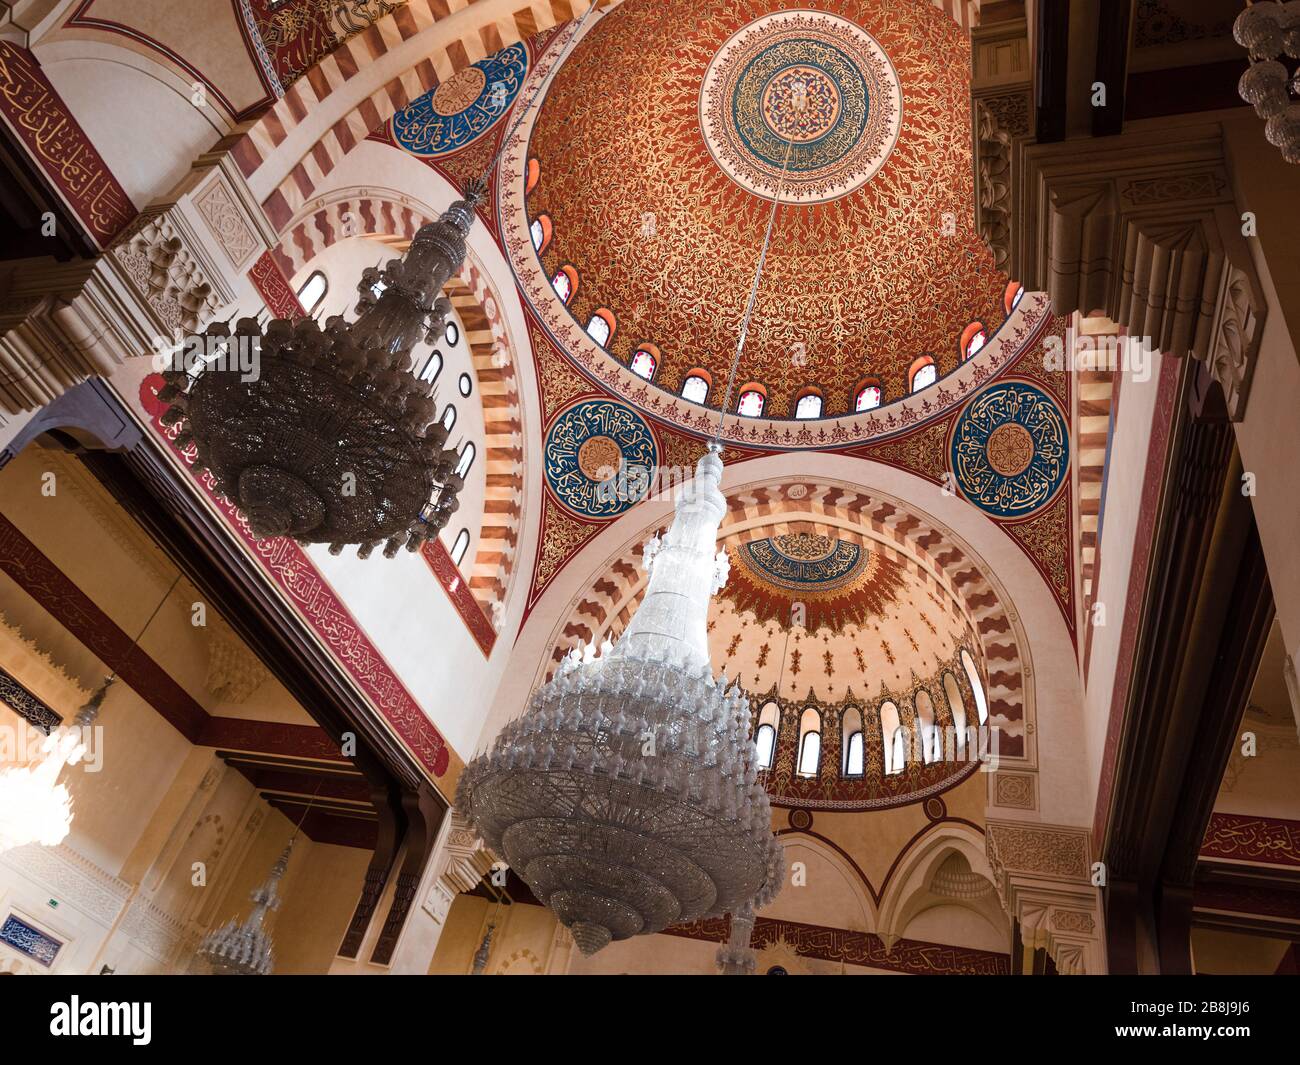 BEIRUT, LEBANON - 01 Apr 2017: The decorated mosque cupola from inside, with Arabic script paintings and hanging glass chandeliers in Al-Amine mosque, Stock Photo